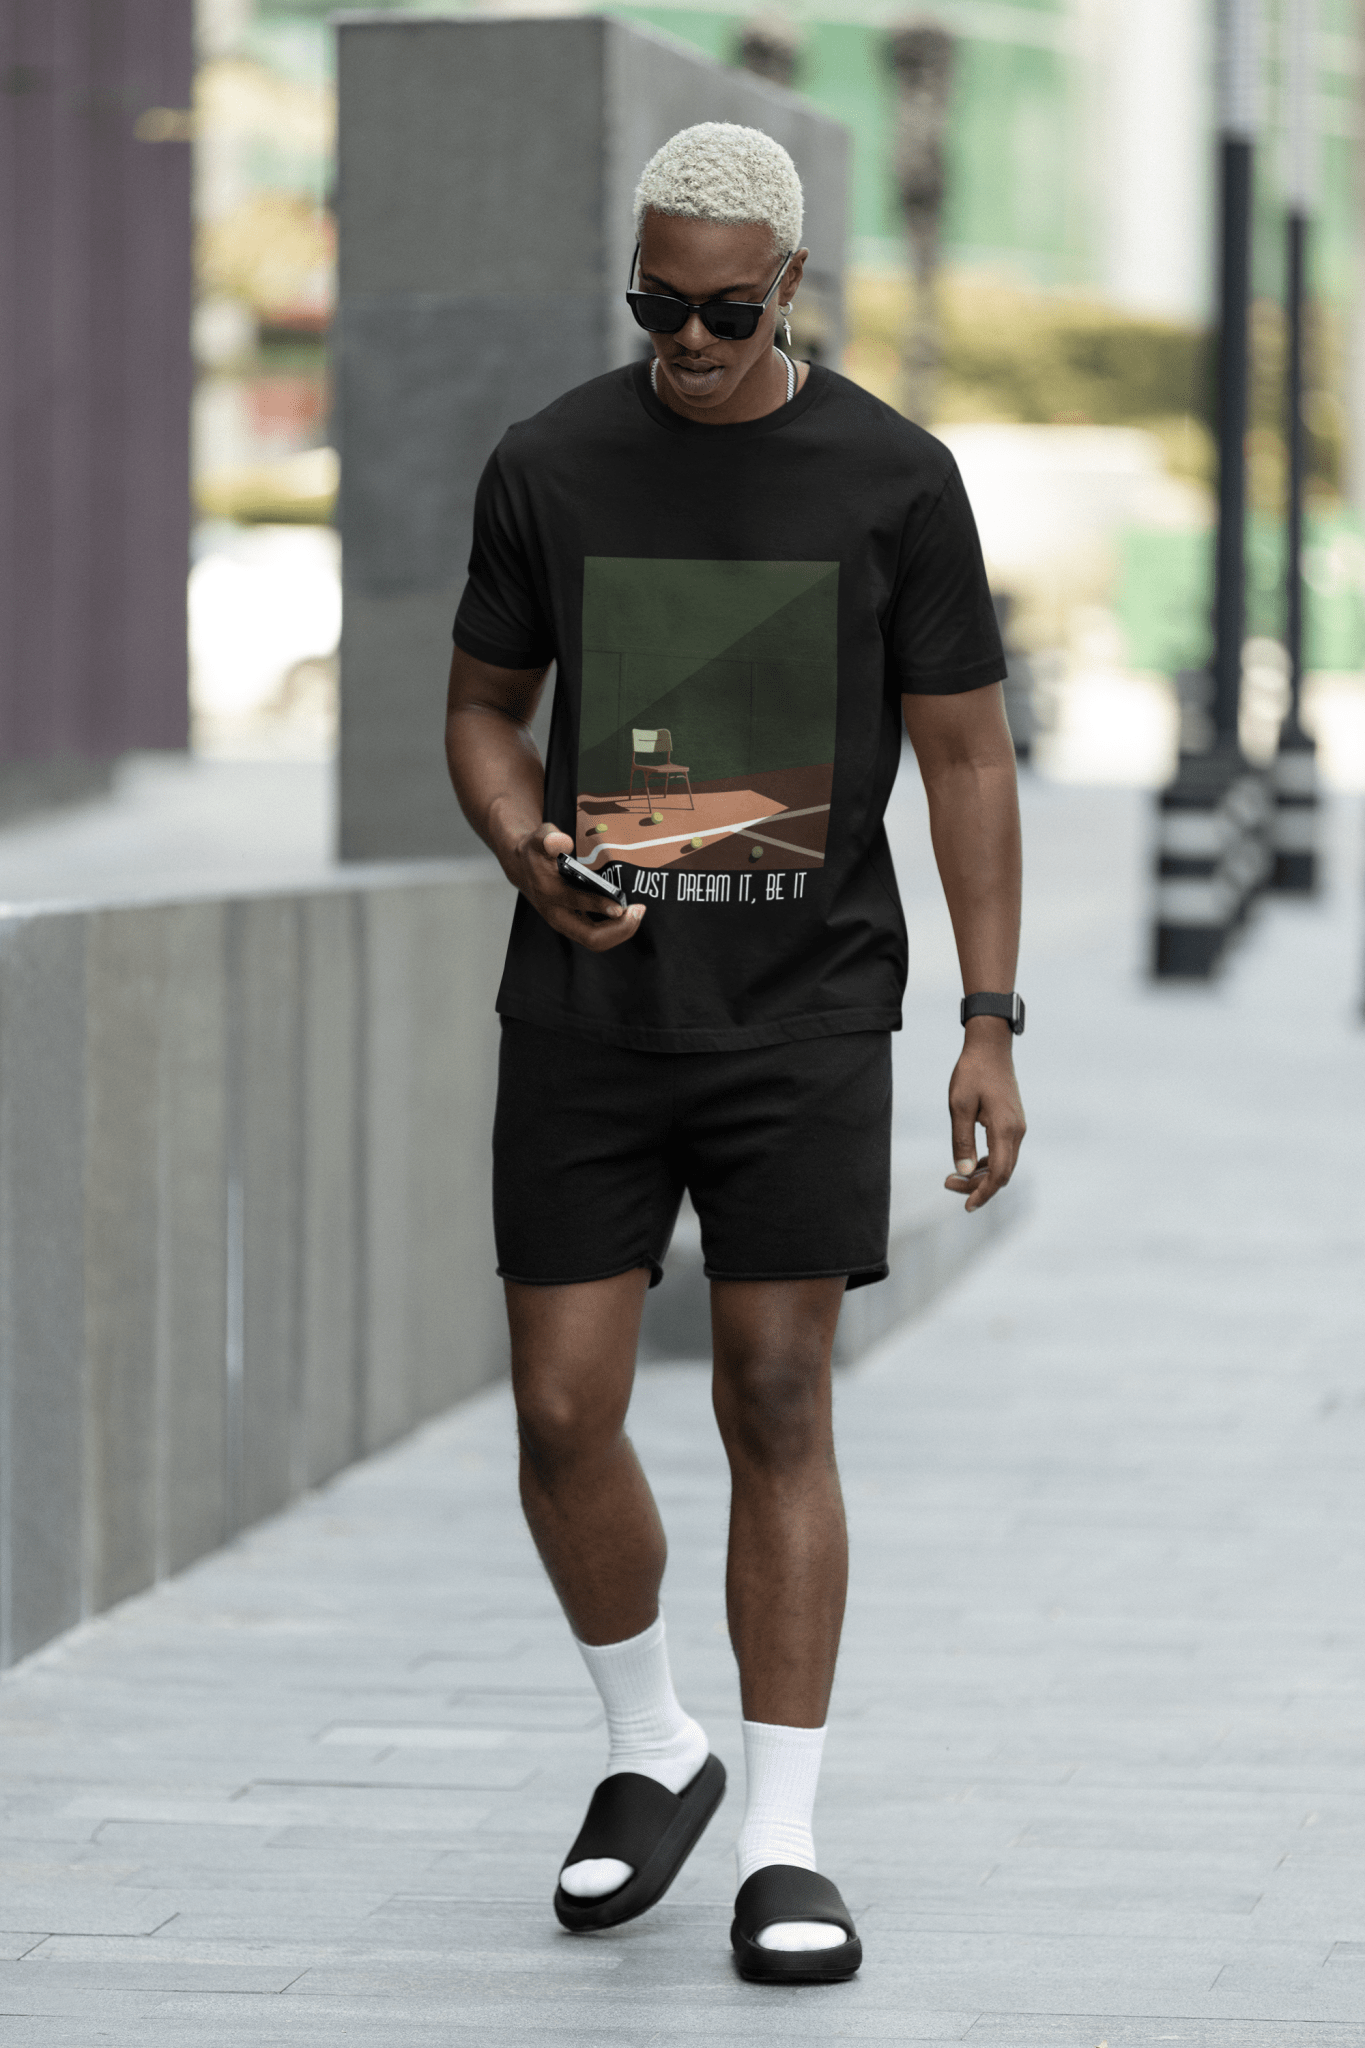 Black man wearing a black casual T-Shirt from Forge Athletica on shorts casually walking on a street using his phone. He is wearing a pair of black glasses and a pair of black sliders with white socks.